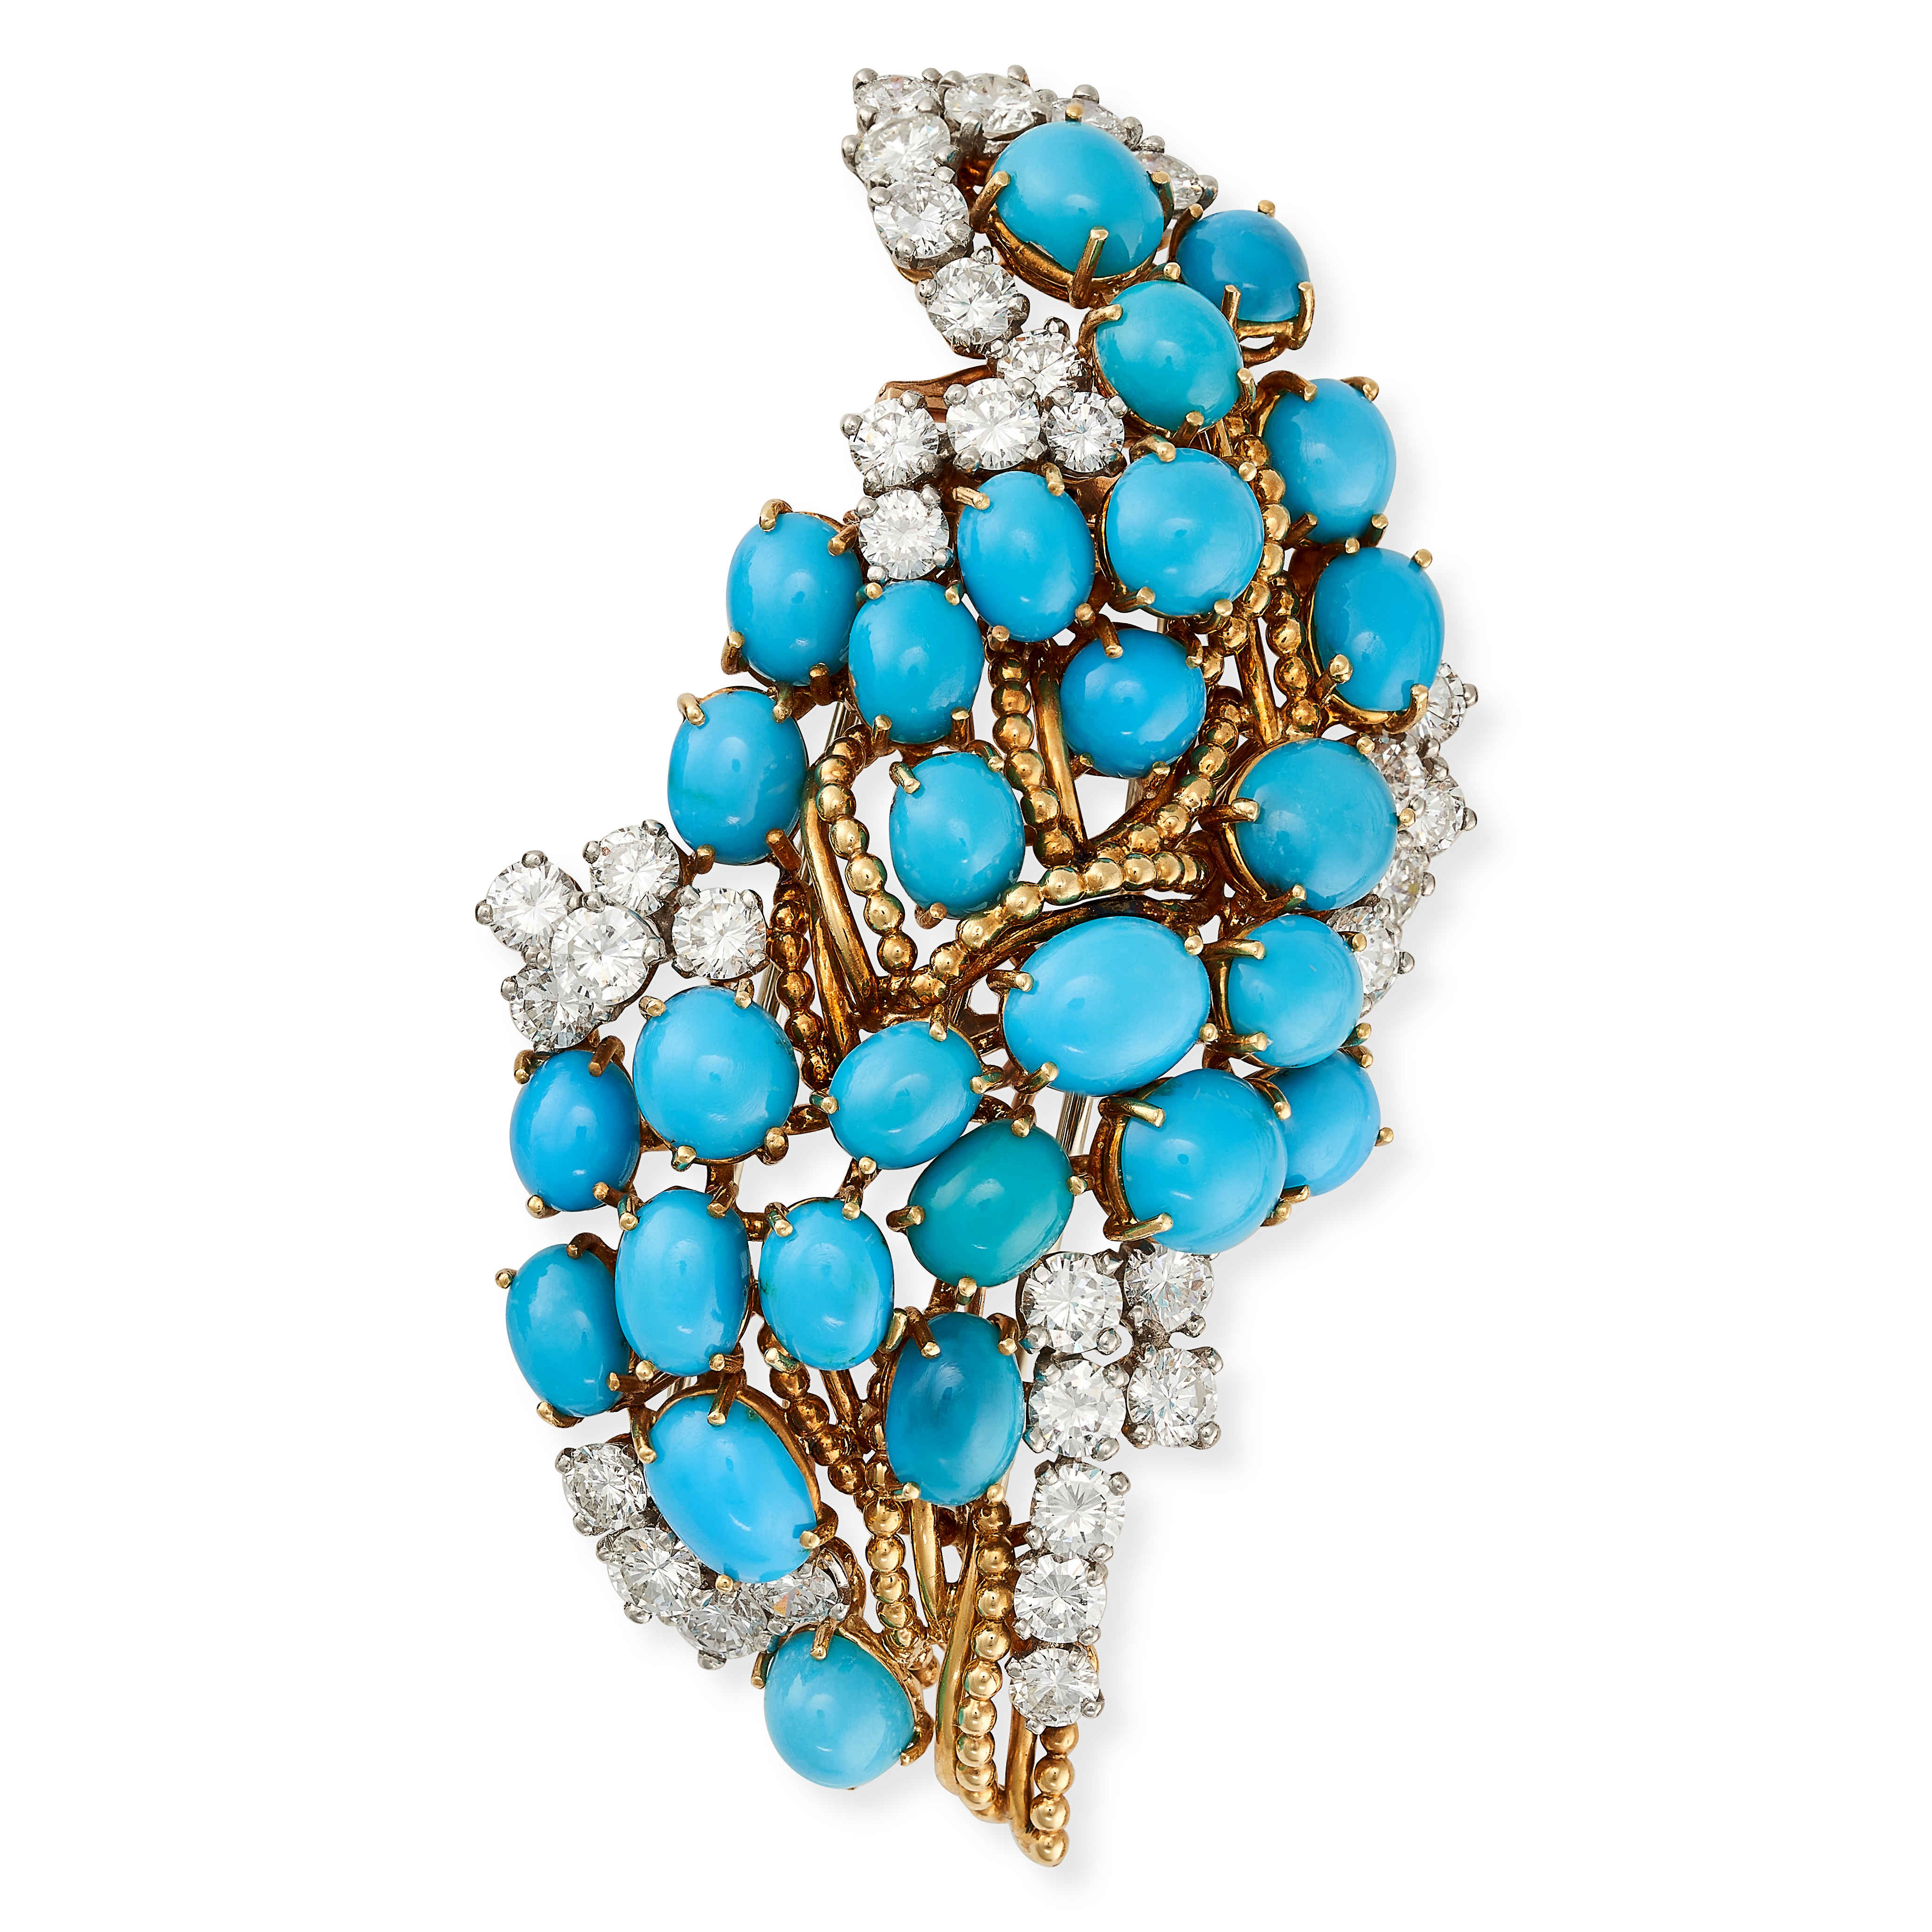 CARTIER, A VINTAGE TURQUOISE AND DIAMOND BROOCH in 18ct yellow gold, the leaf-shaped brooch set with